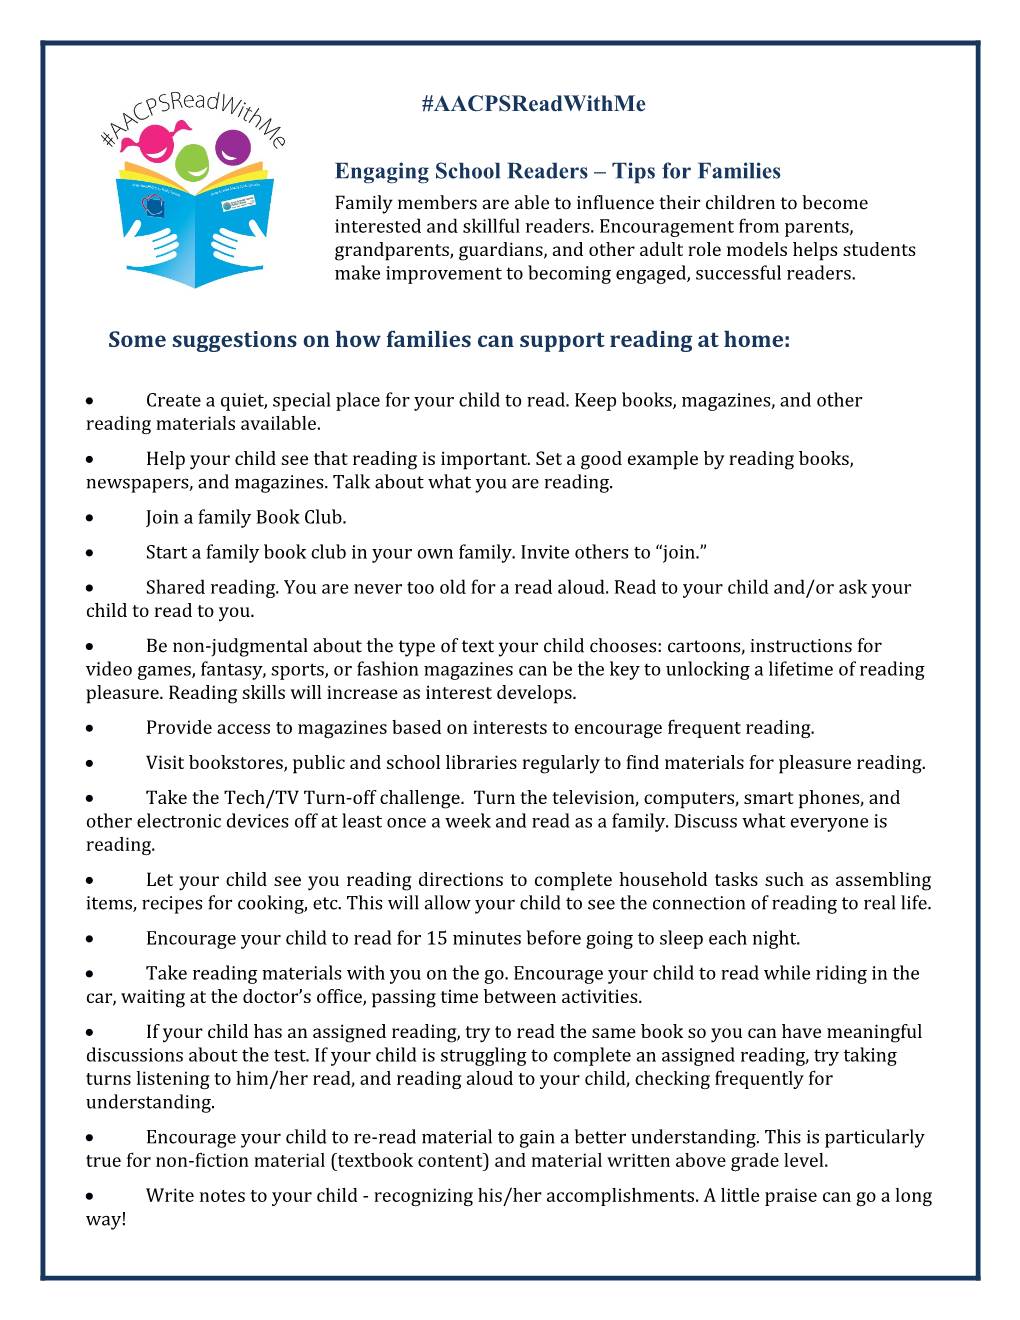 Reading Tips for Parents of Middle School Students